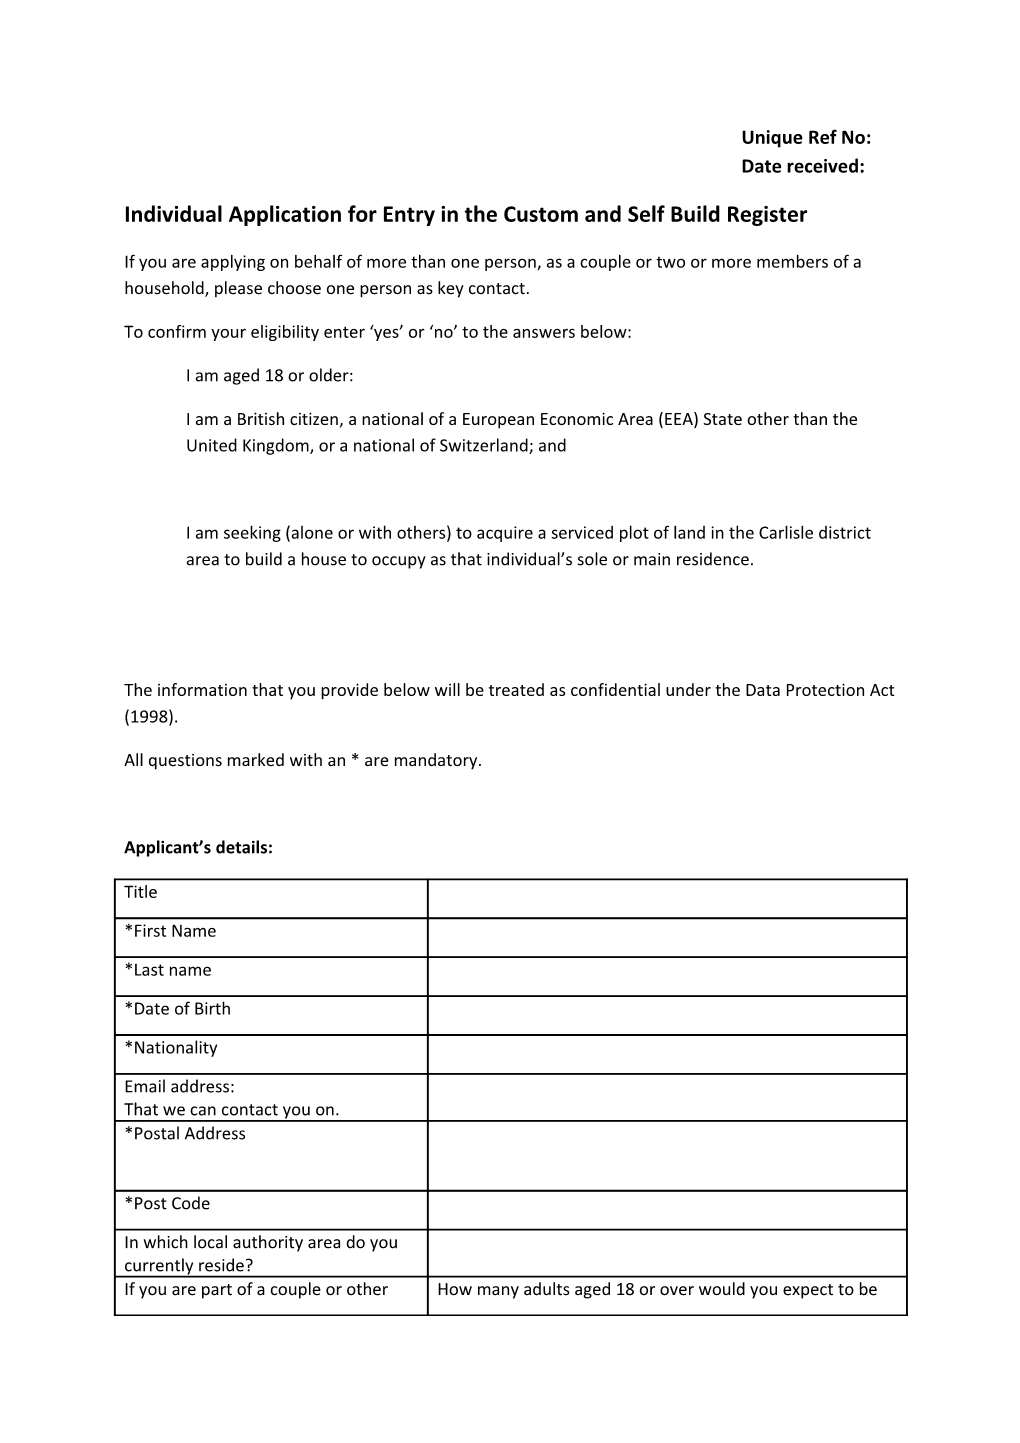 Individual Application for Entry in the Custom and Self Build Register